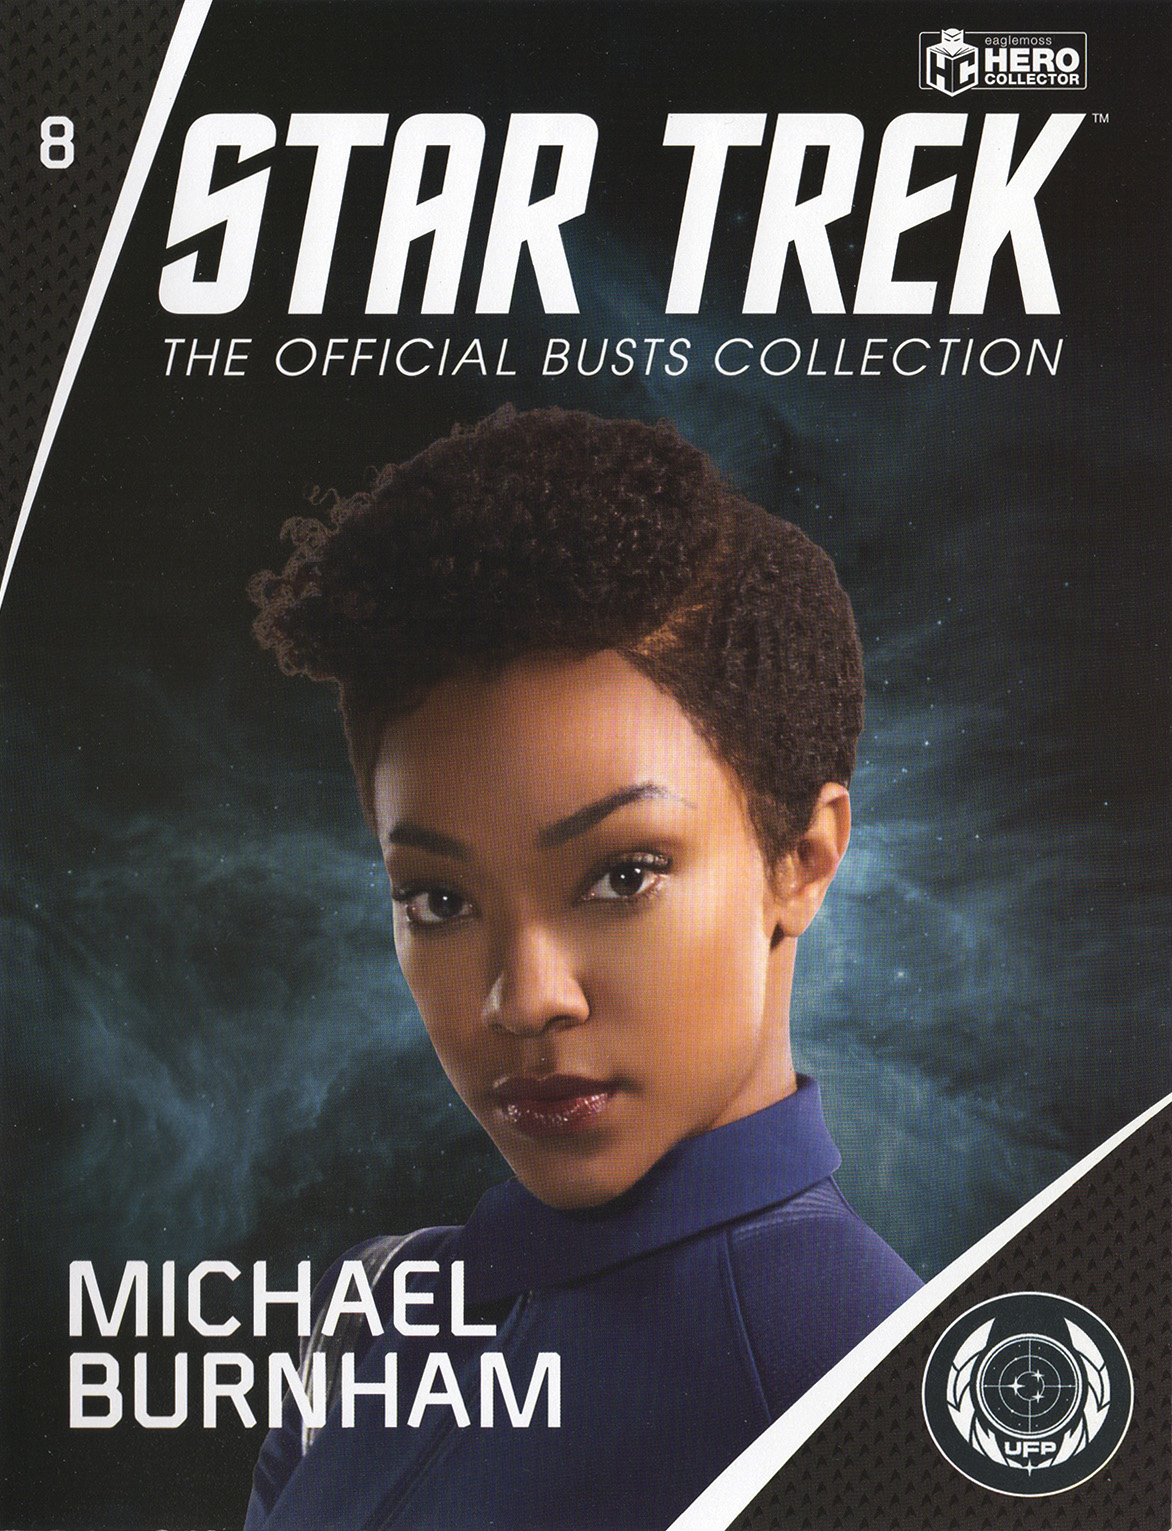 Star Trek: The Official Busts Collection #8.jpg